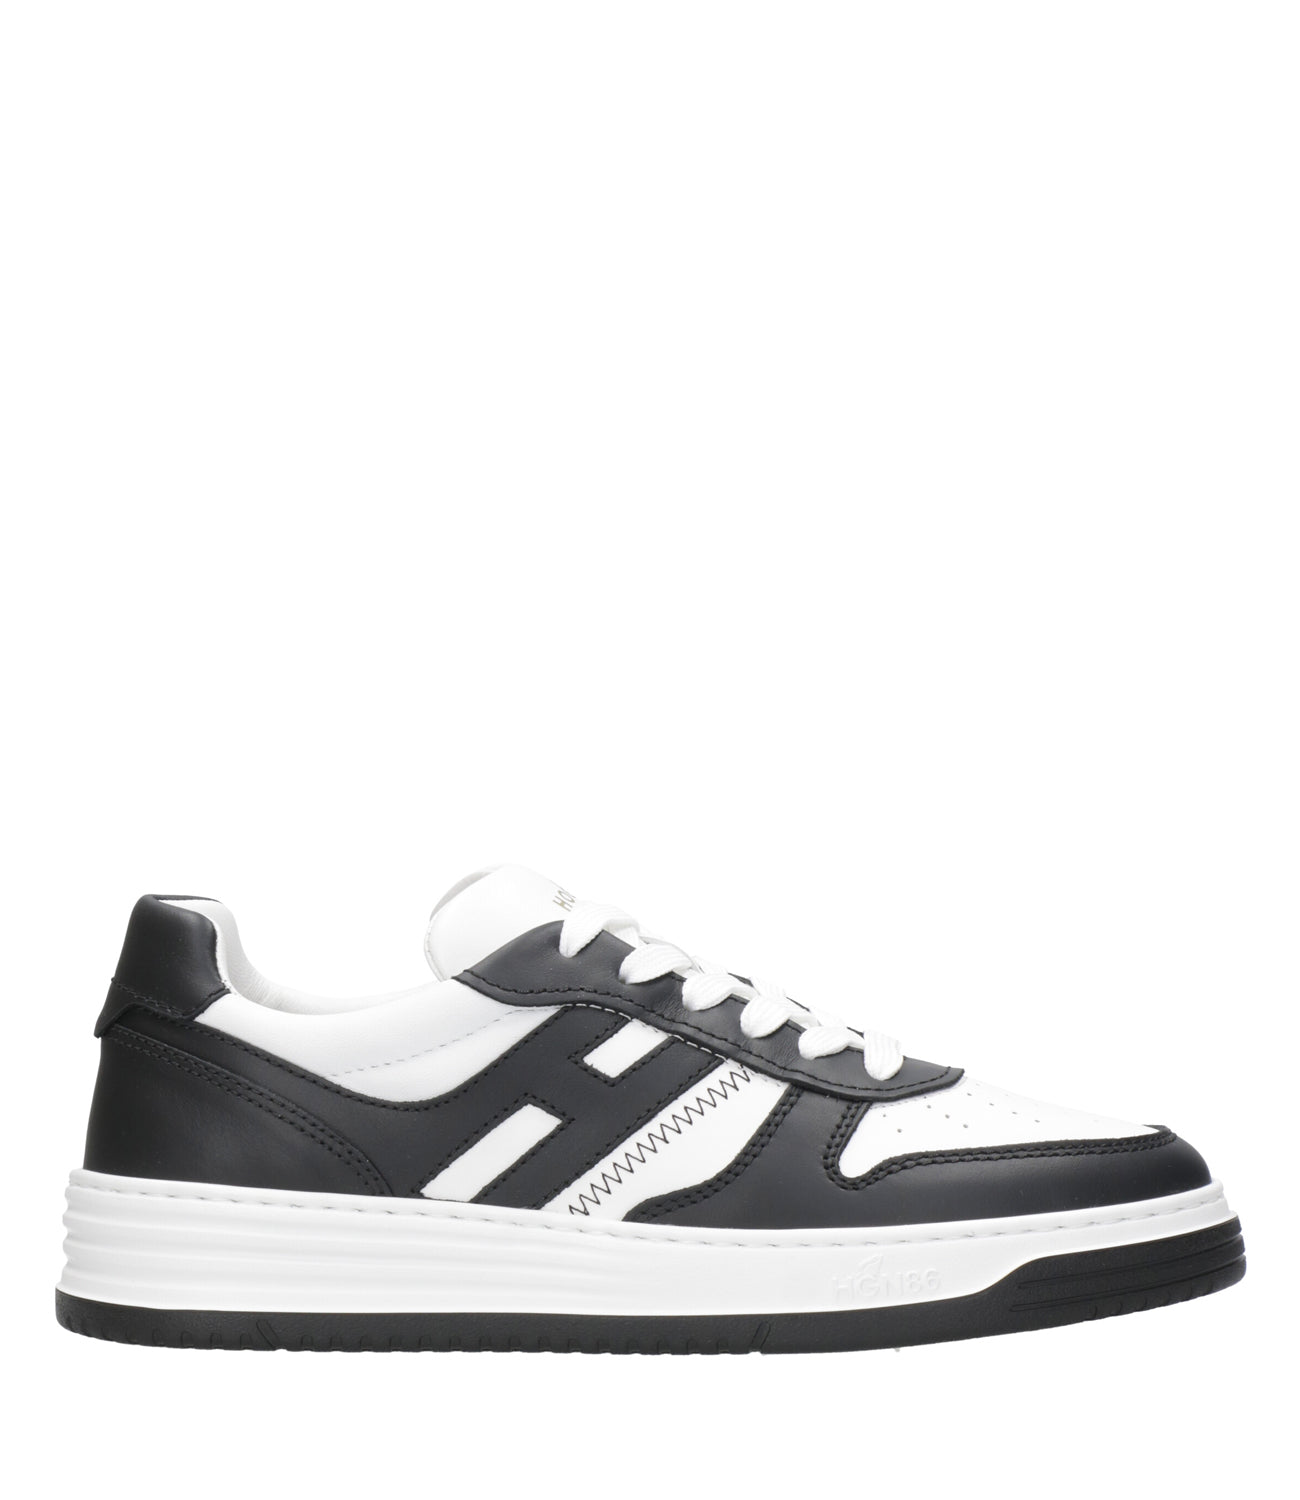 Hogan | Sneakers H60 Lace-up Black and White